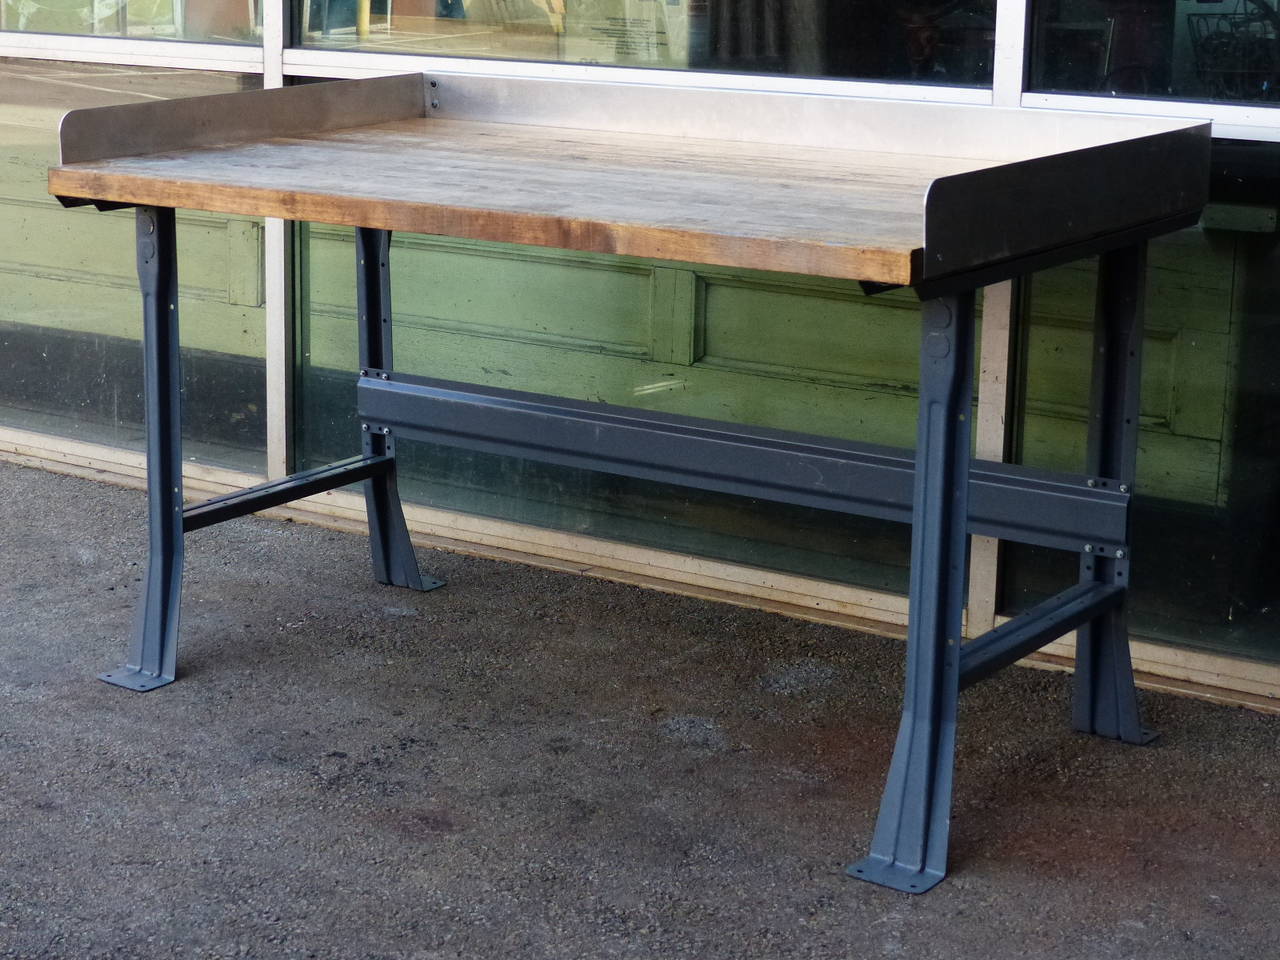 Steel industrial work table with maple top and 3/4 aluminum surround back splash.